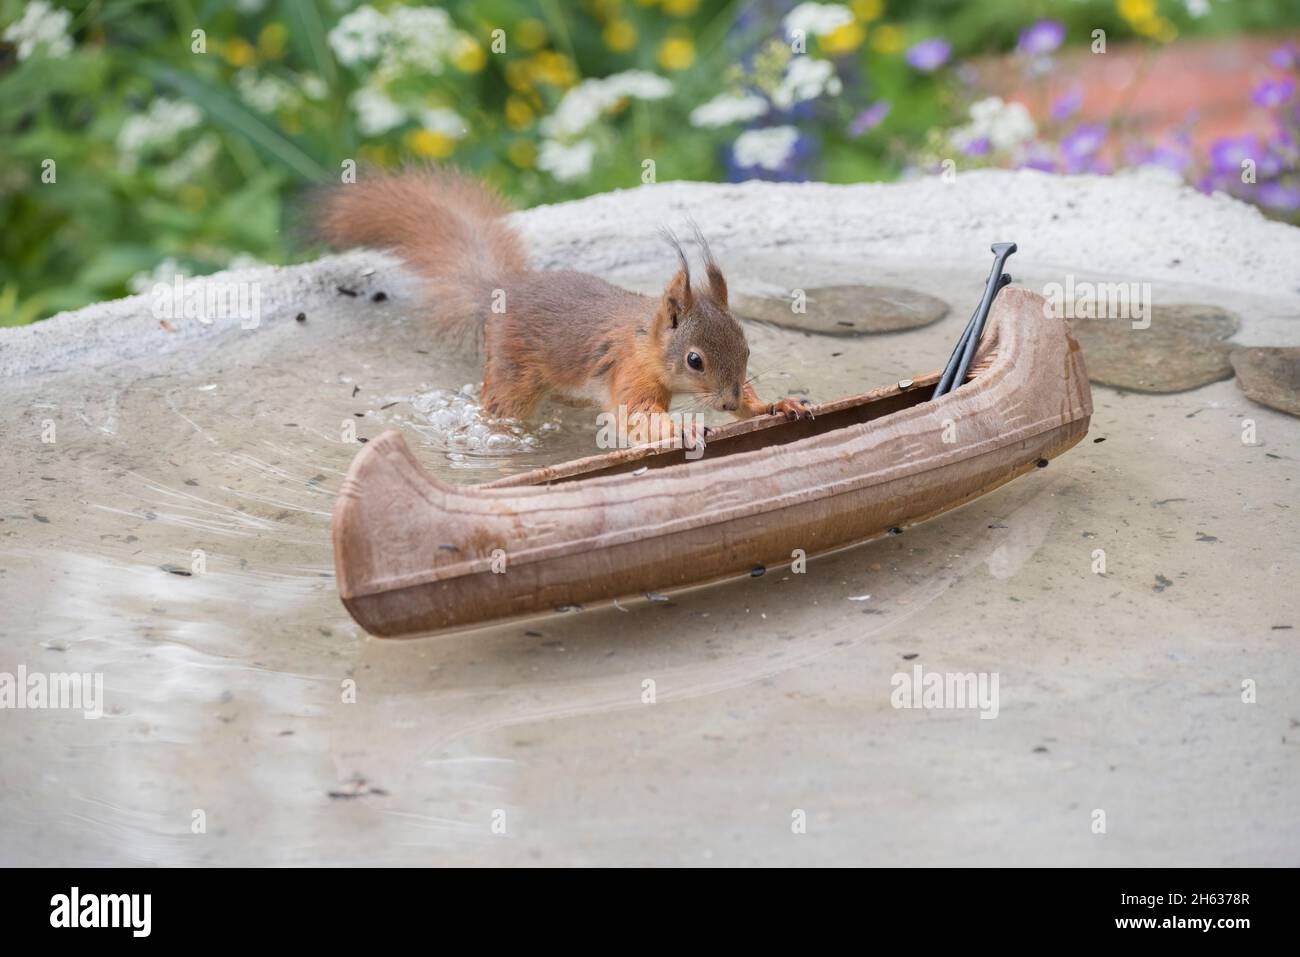 close up of red squirrel standing in water holding a canoe with paddles Stock Photo